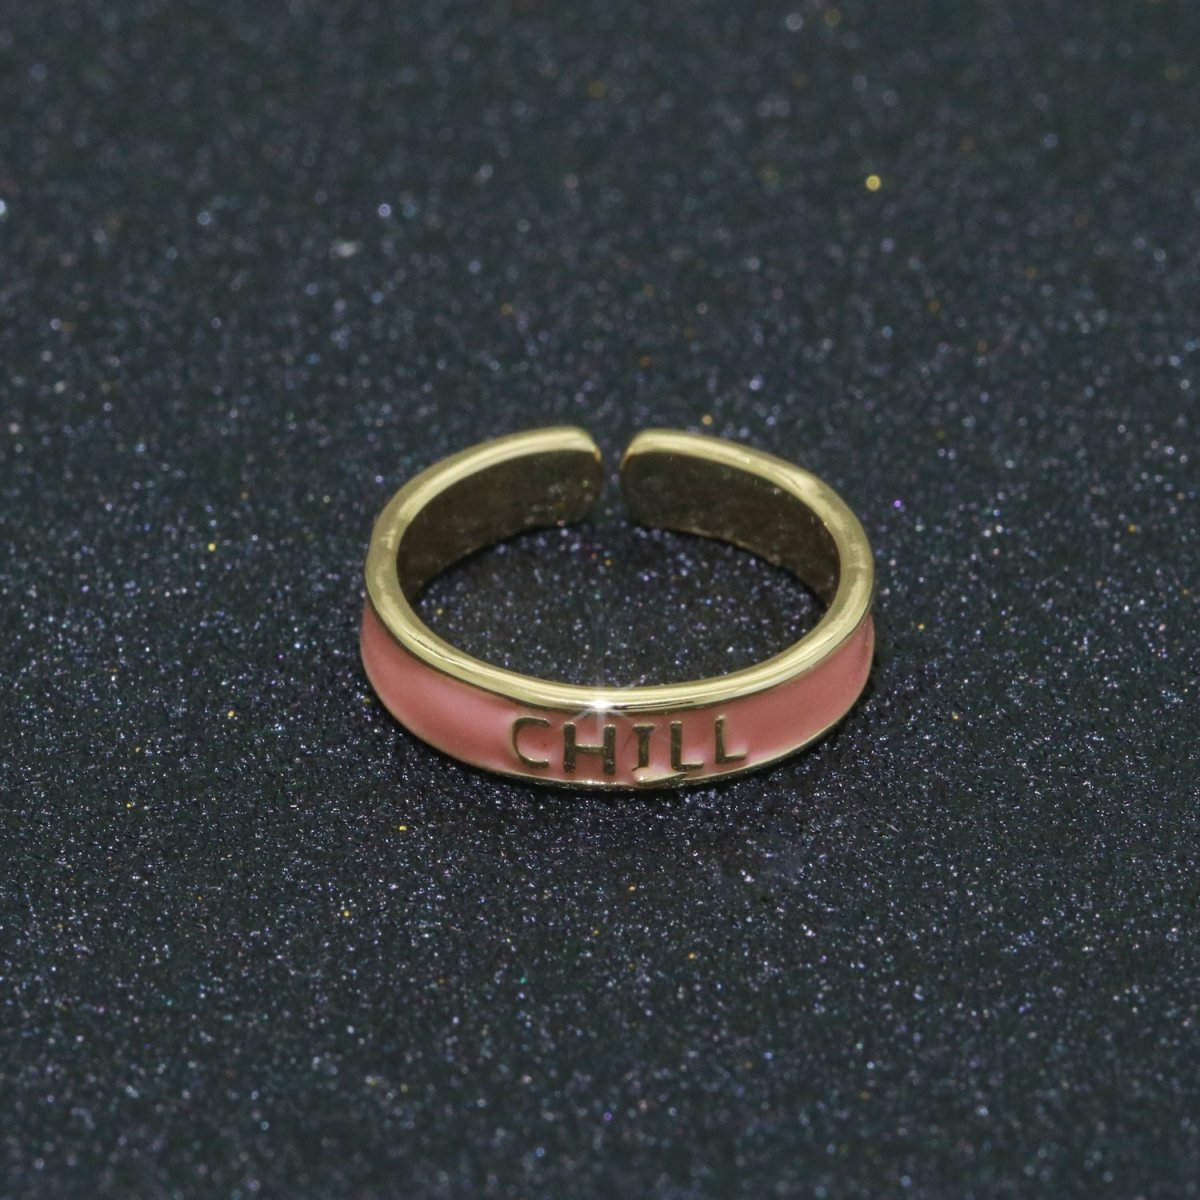 Enamel Ring - Statement Ring - Encourage Word Ring - Happy Love Chill Ring Pink Stacking Ring Y2K Ring Open Adjustable Ring S-099 S-100 S-101 - DLUXCA